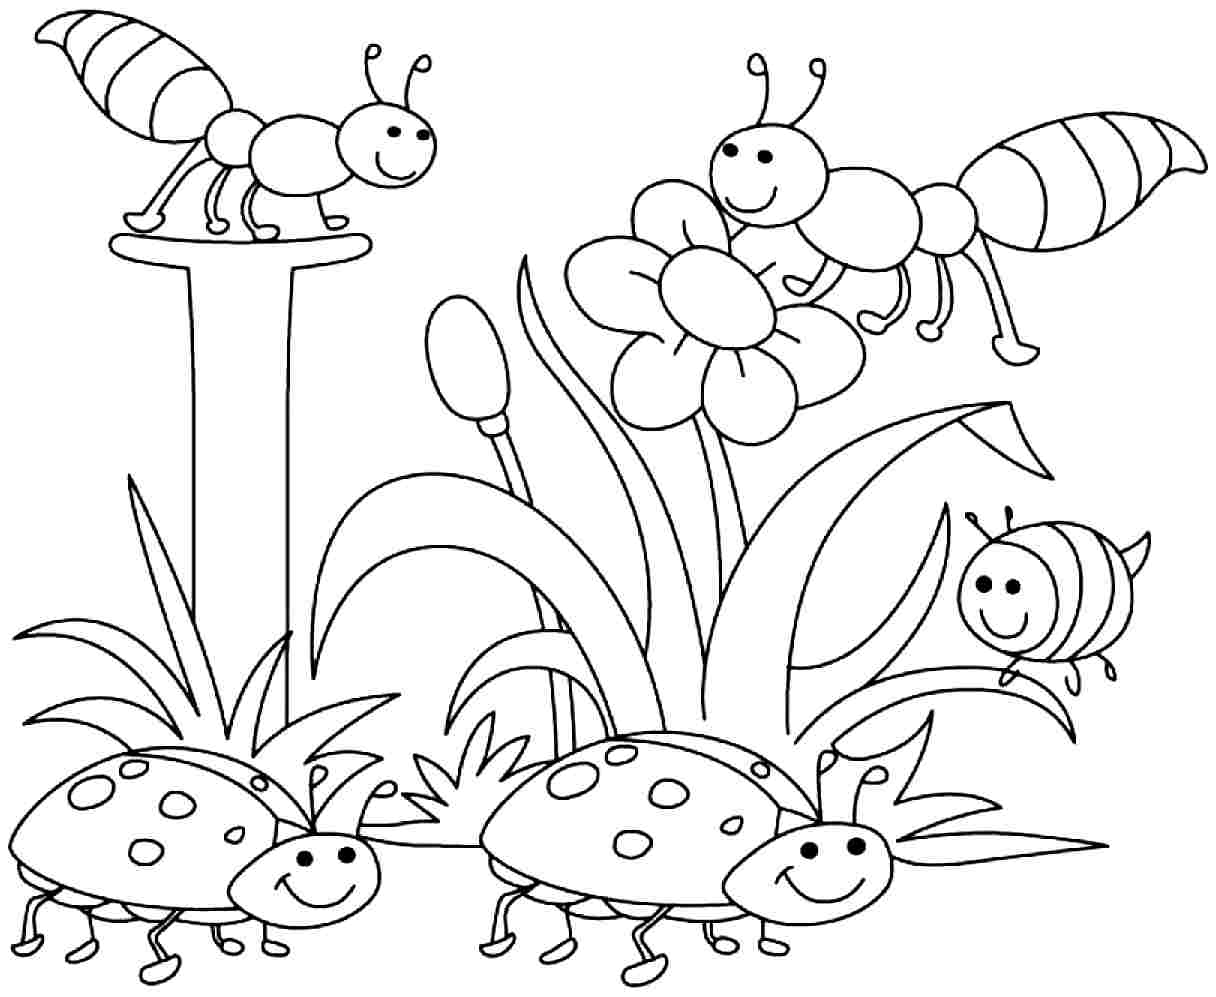 Free Coloring Pages Spring Season   Coloring Home